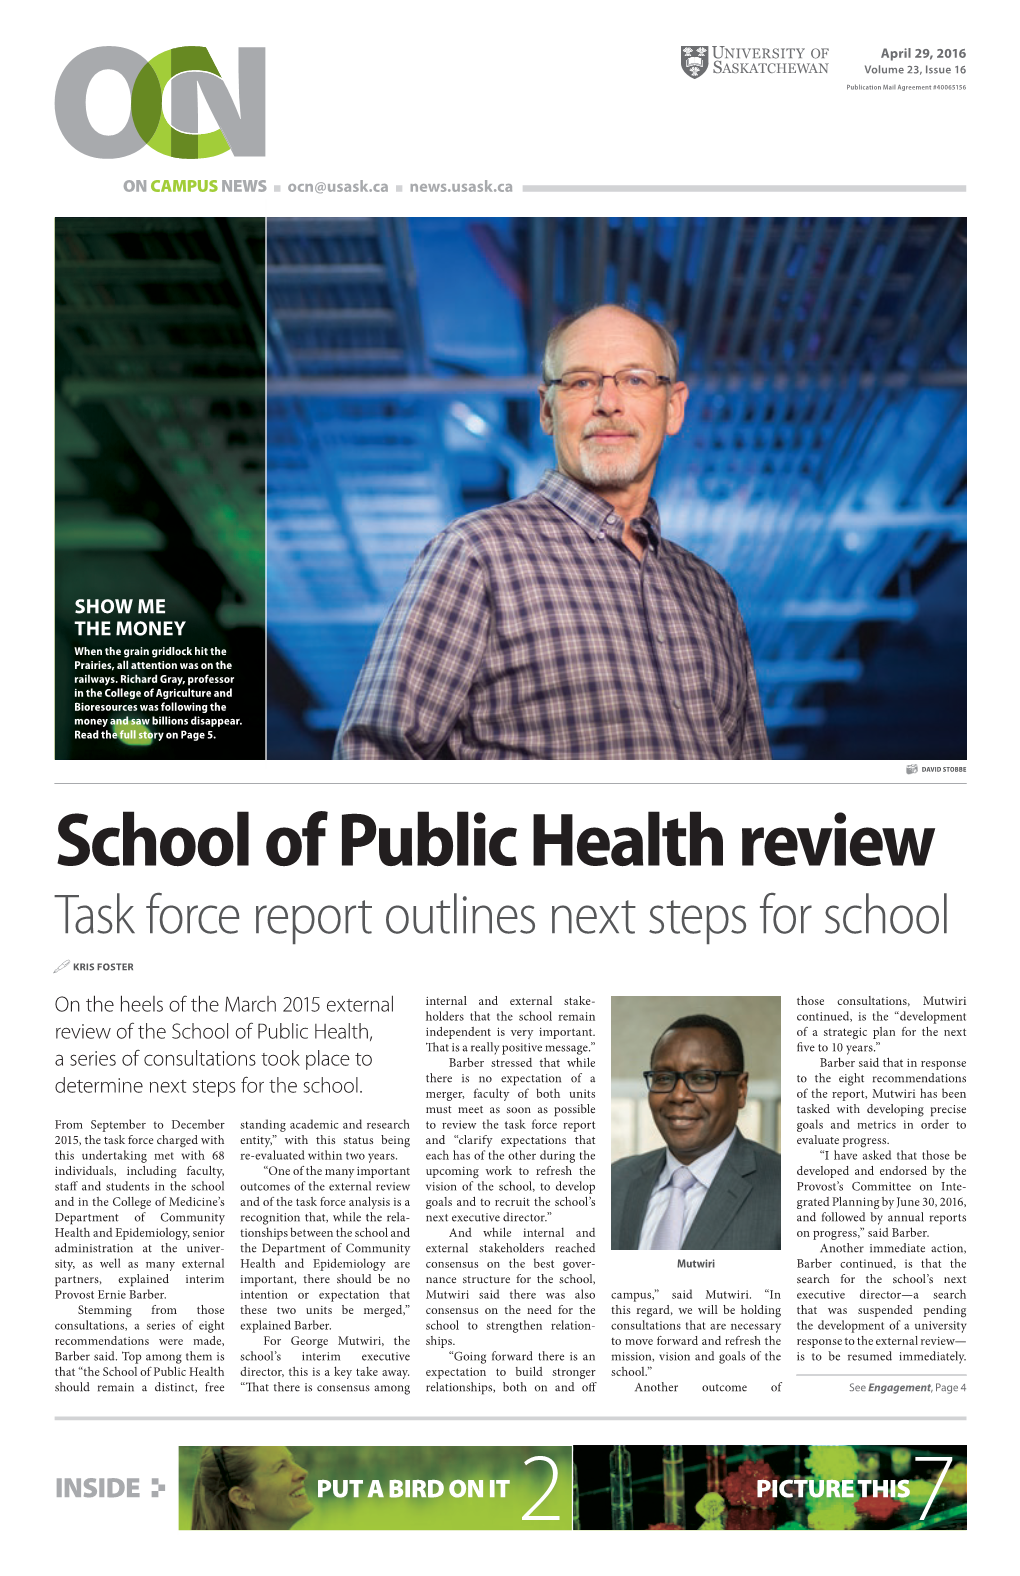 School of Public Health Review Task Force Report Outlines Next Steps for School